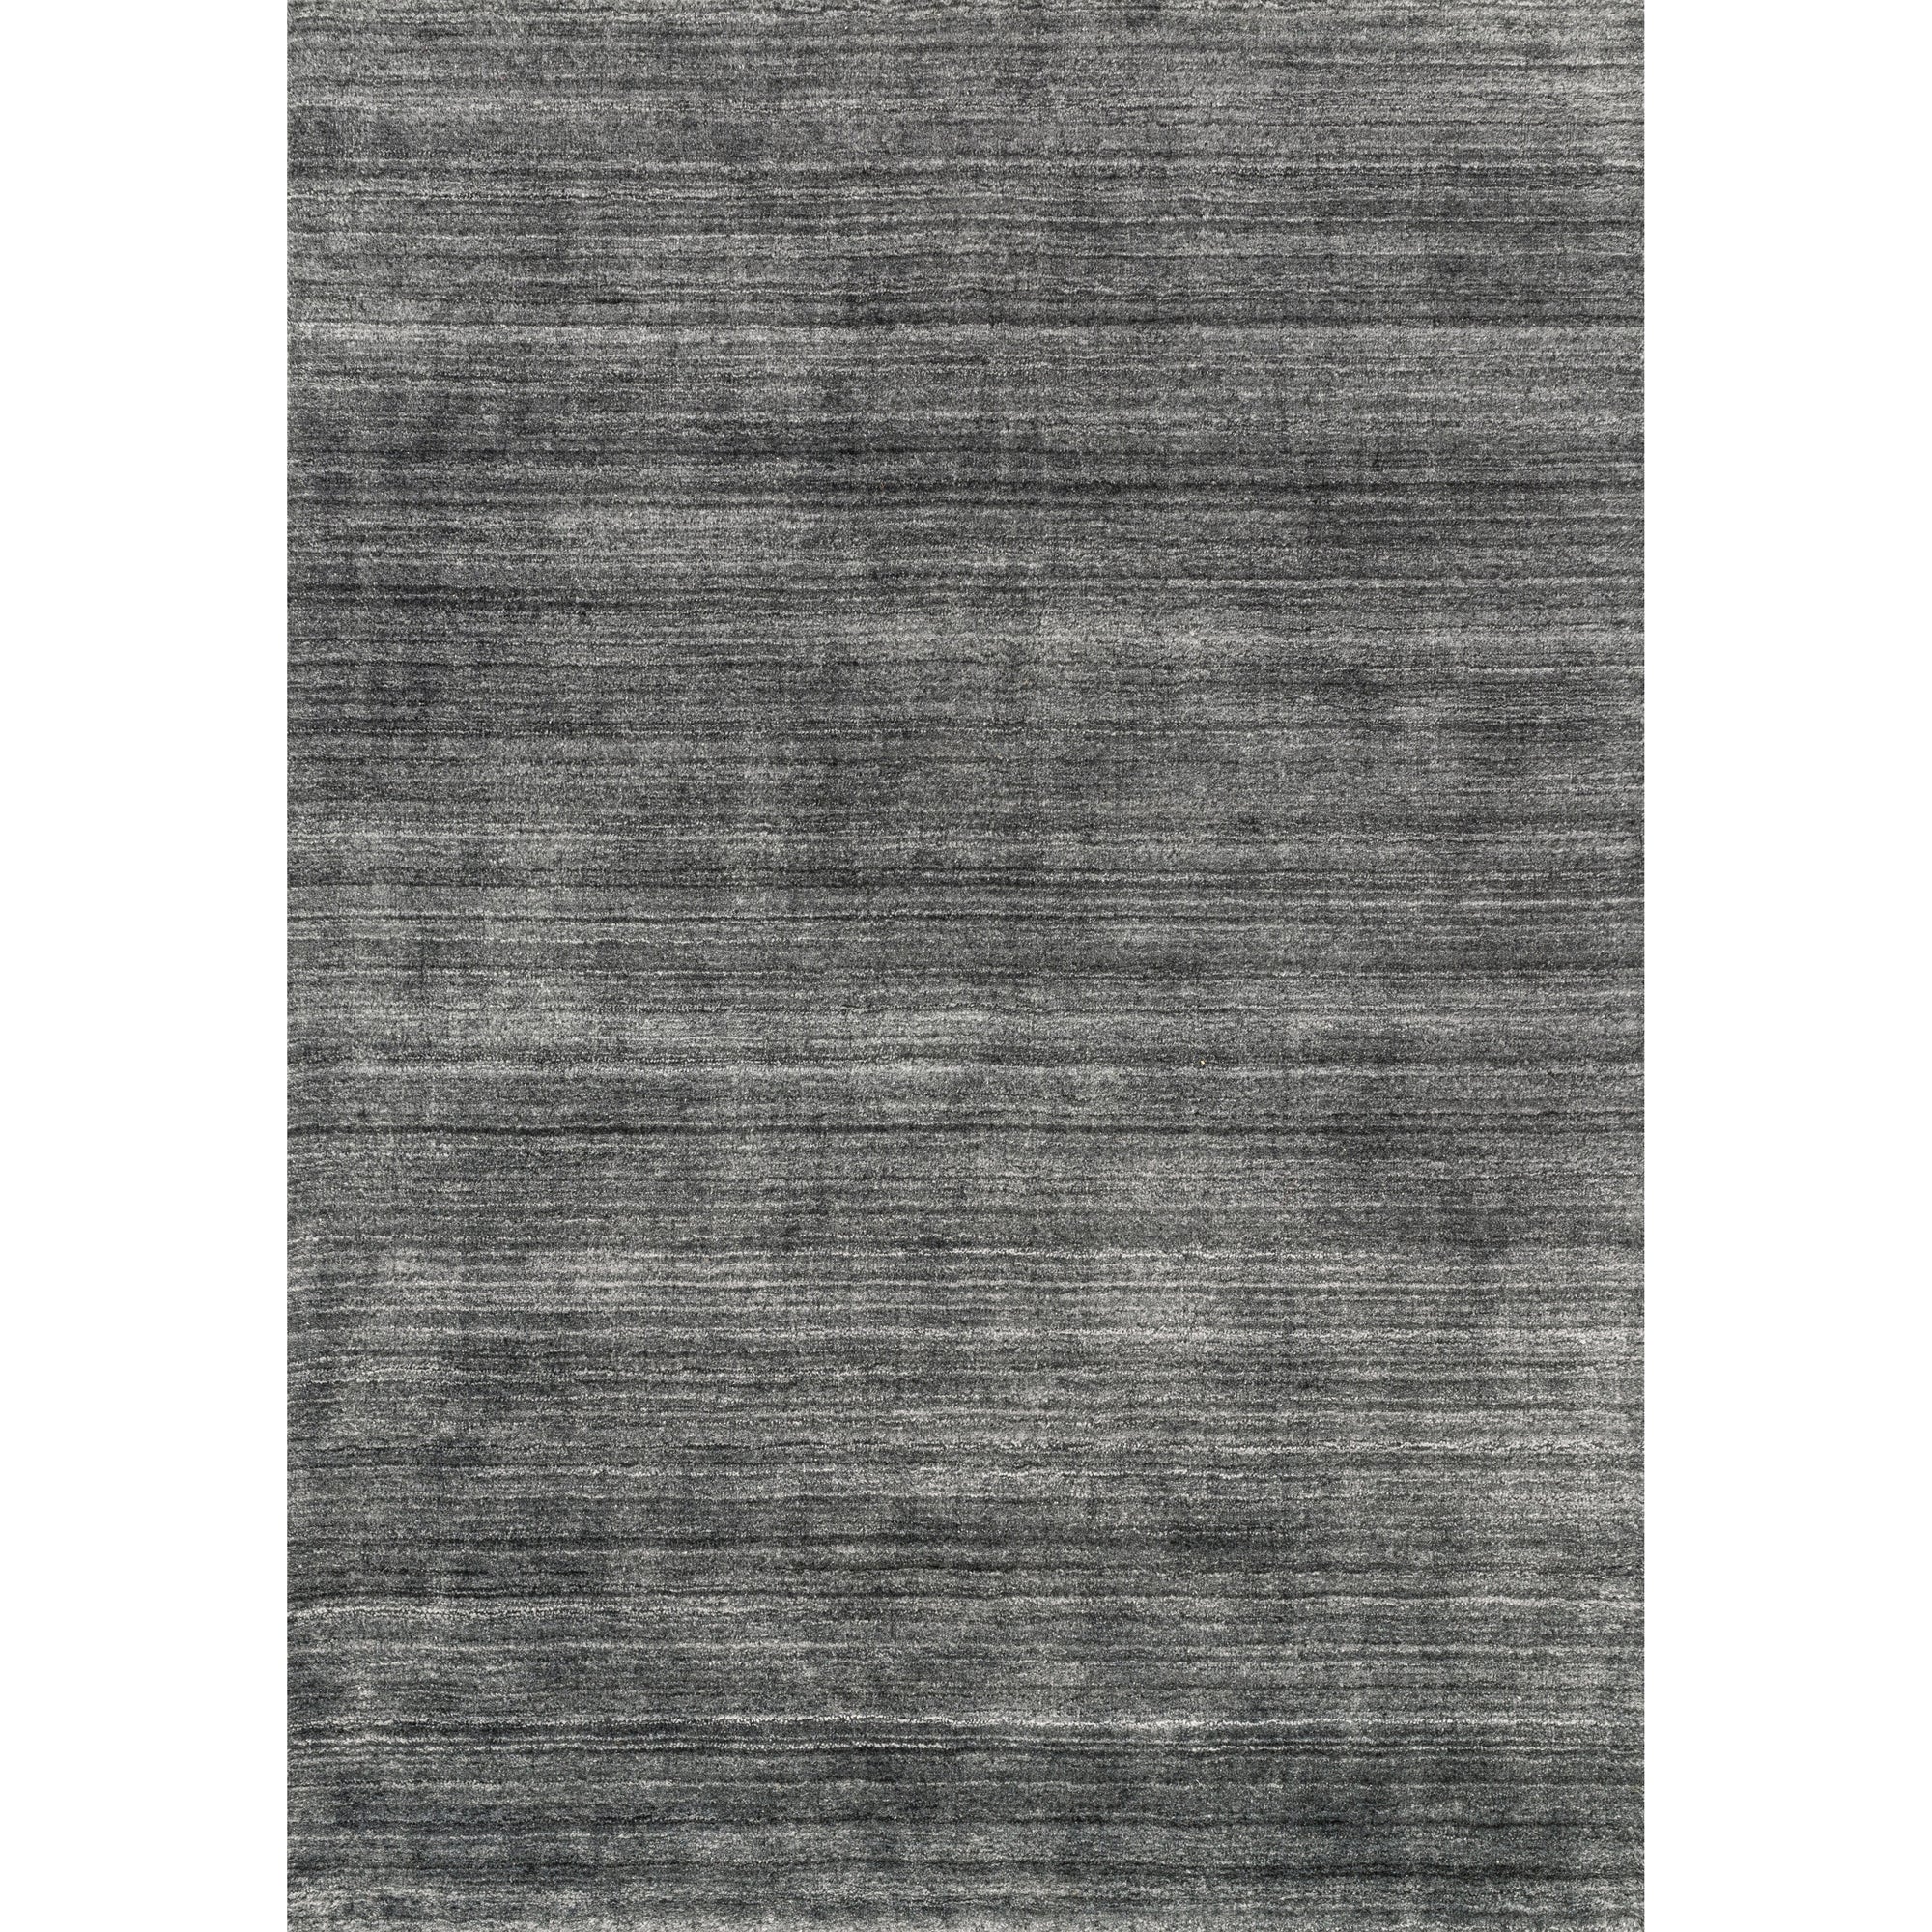 Rugs by Roo Loloi Barkley Charcoal Area Rug in size 3' 6" x 5' 6"